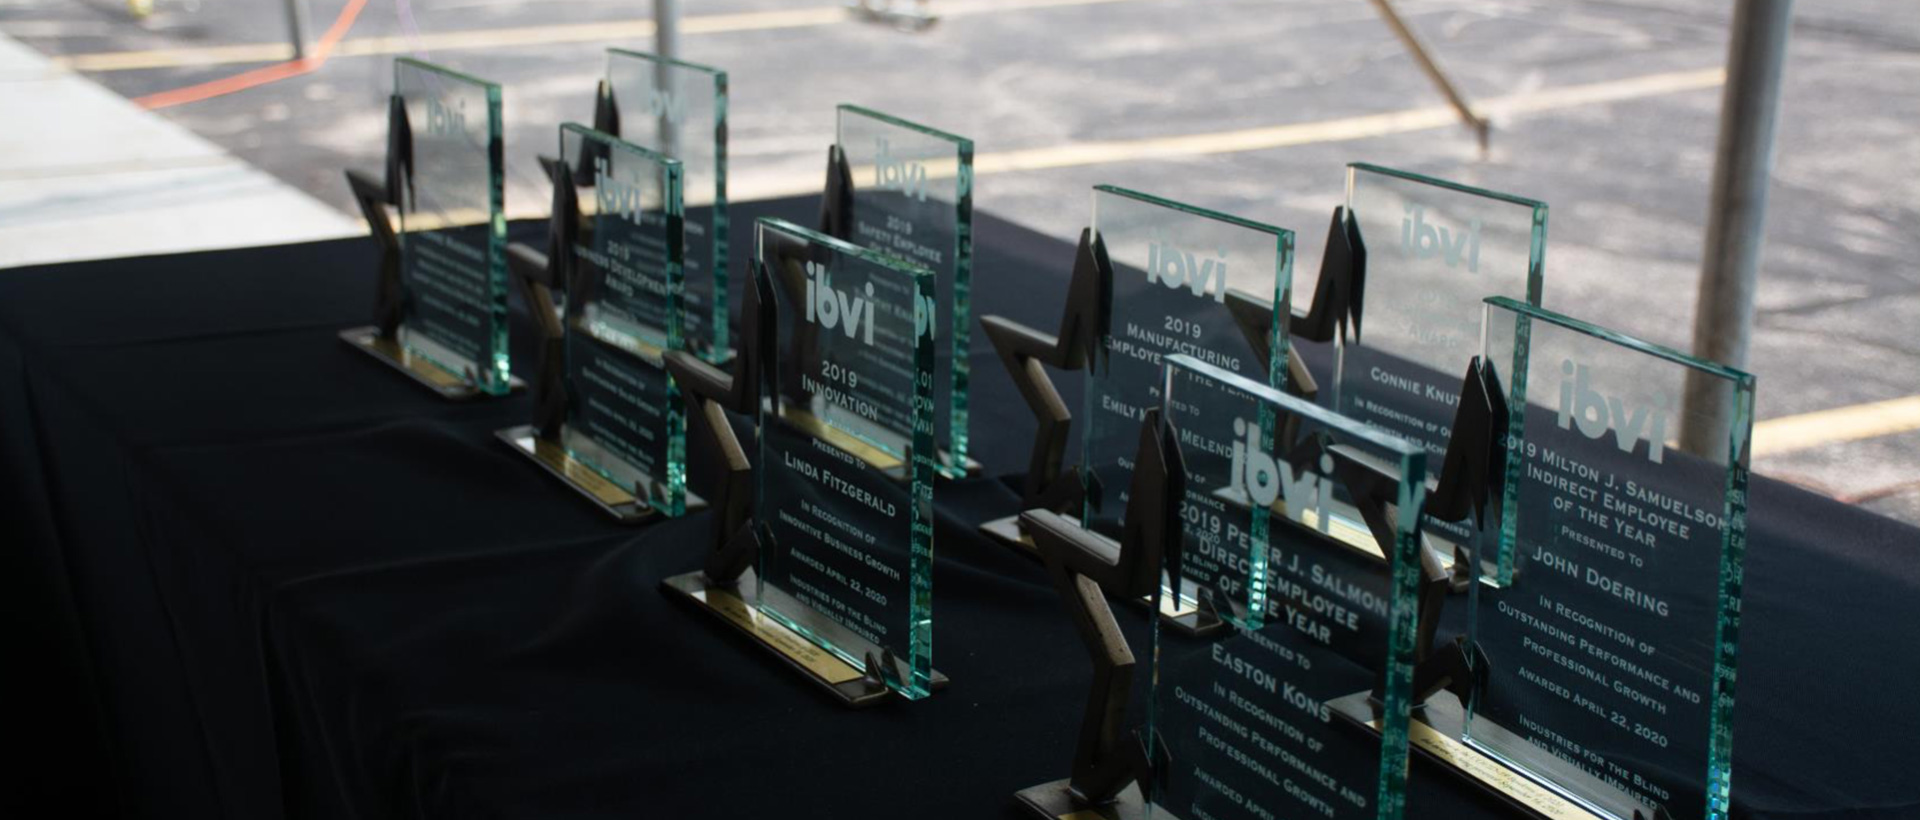 IBVI awards on a table